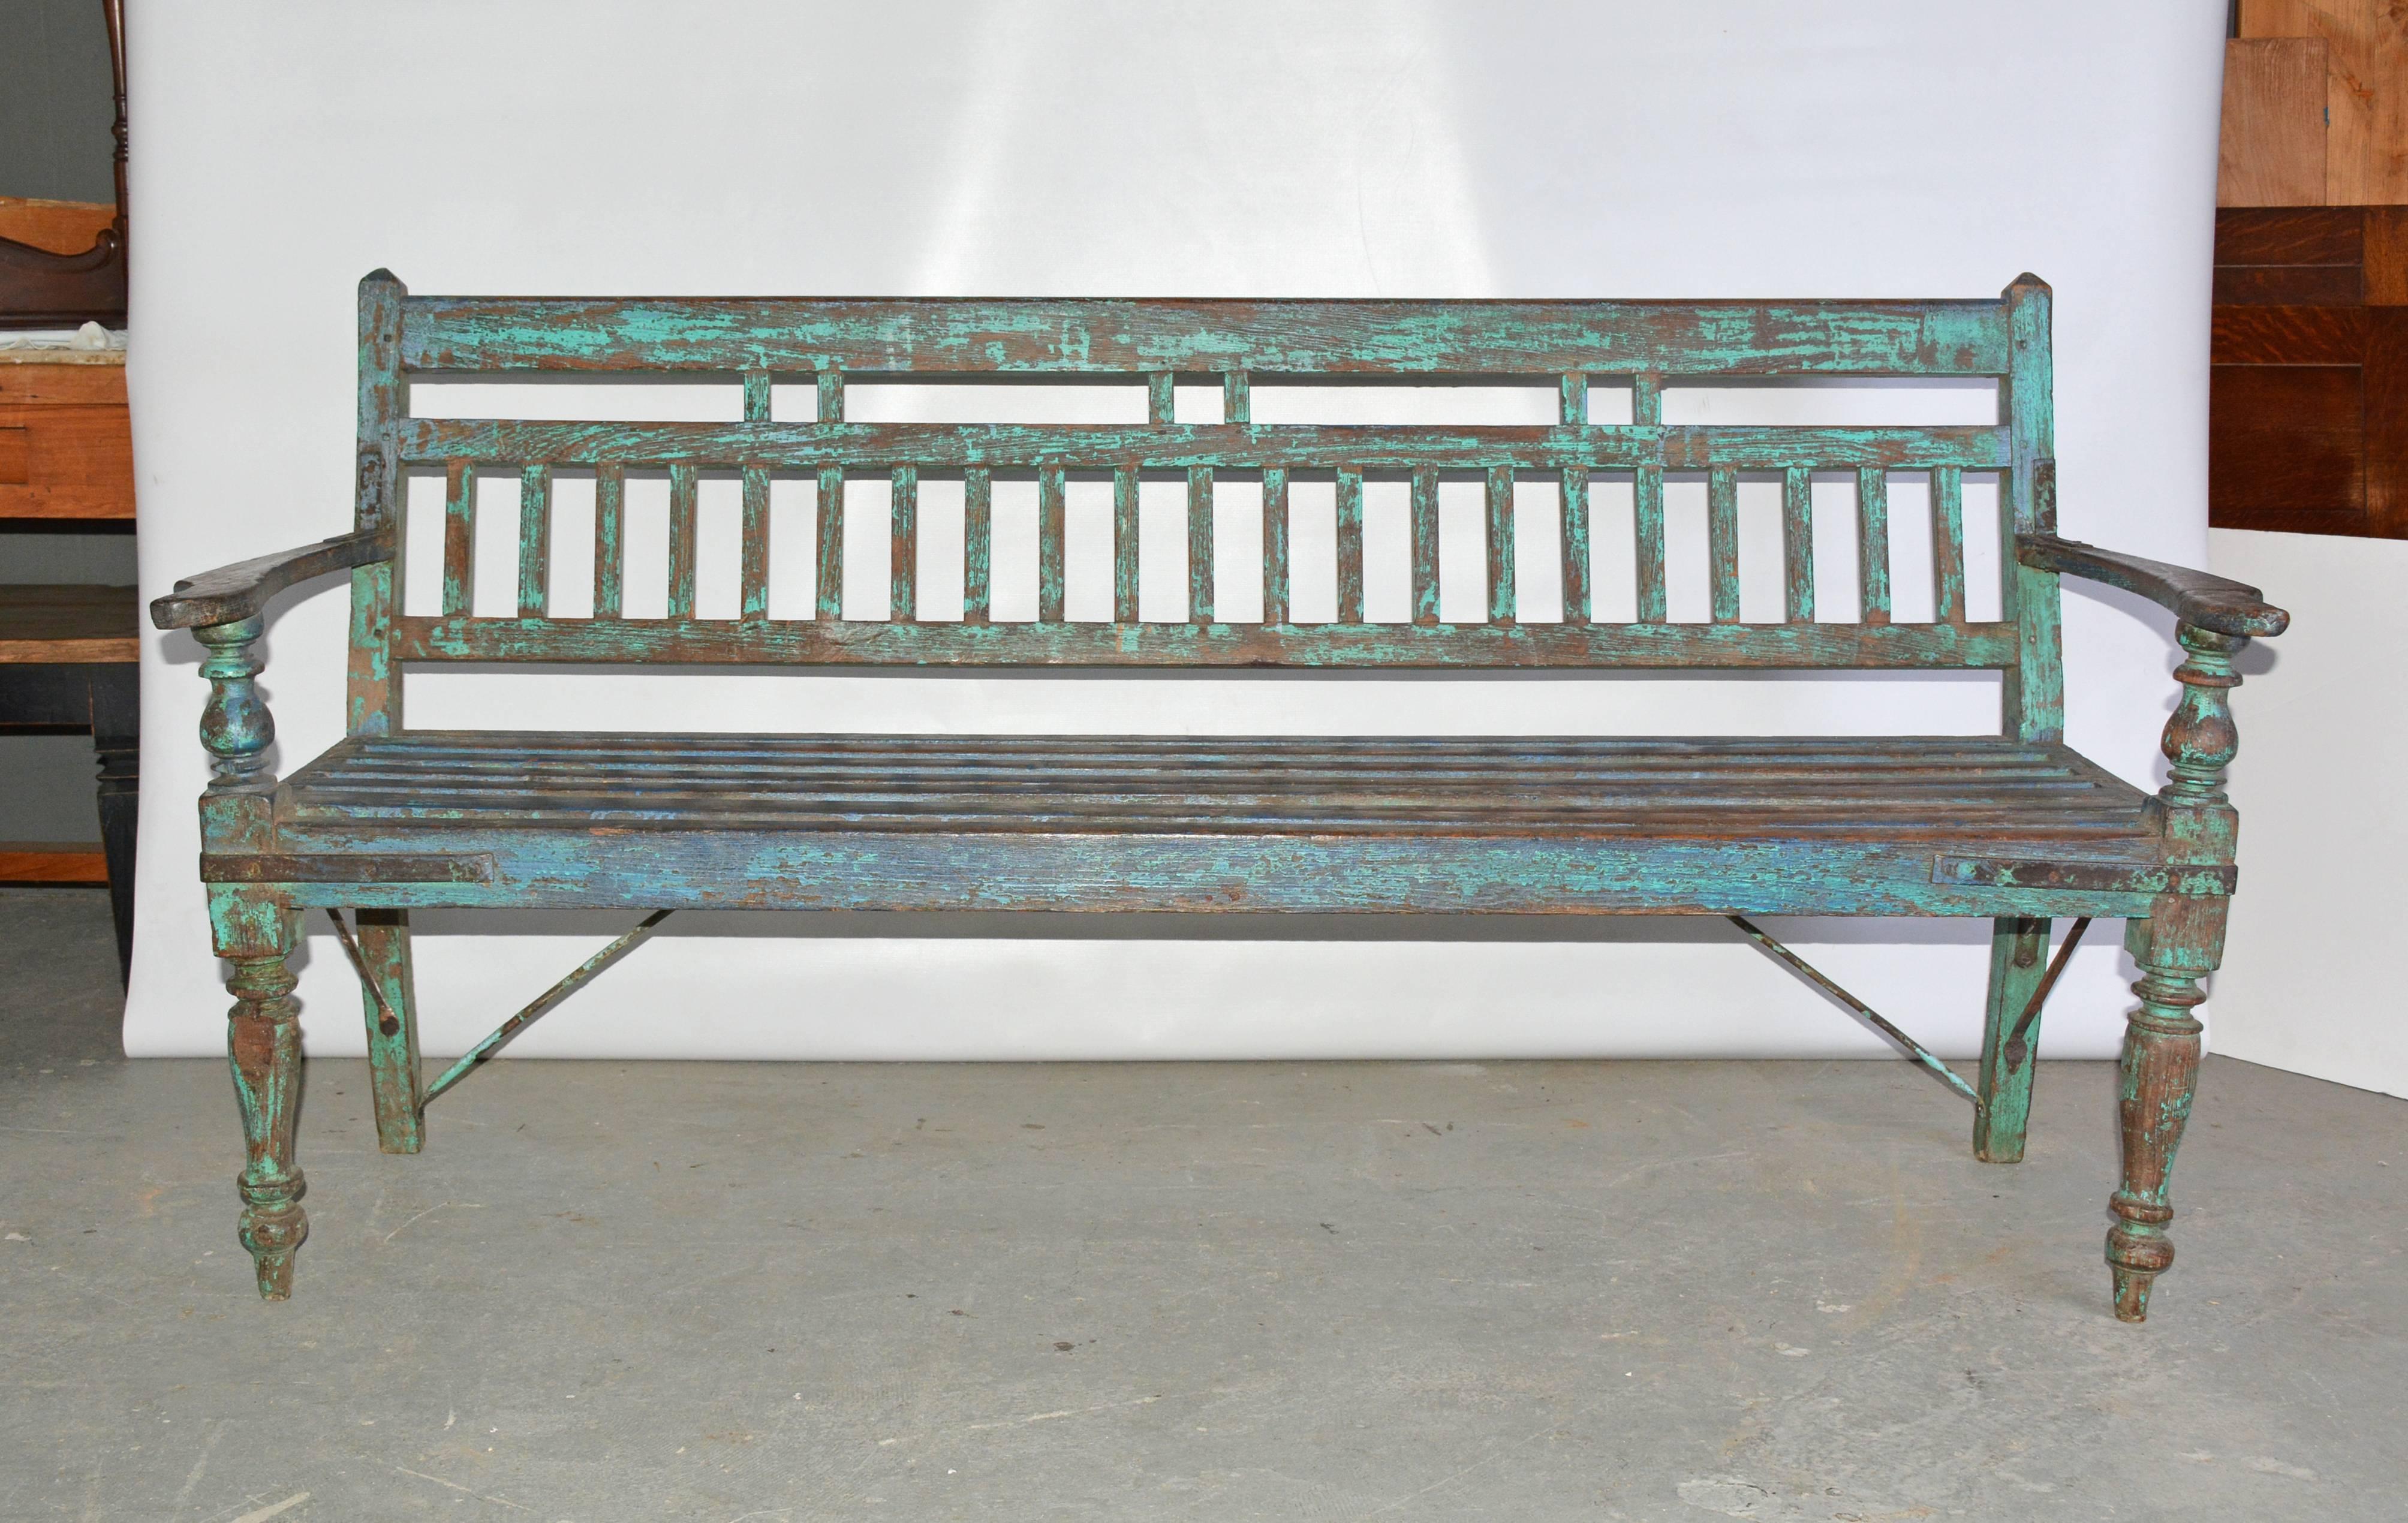 The Dutch colonial garden/porch teakwood bench with painted blue-green wood has turned front legs and arm supports, metal rod supports and metal braces. The slatted seat is slightly concave.

Measures: Arm height 24.88".